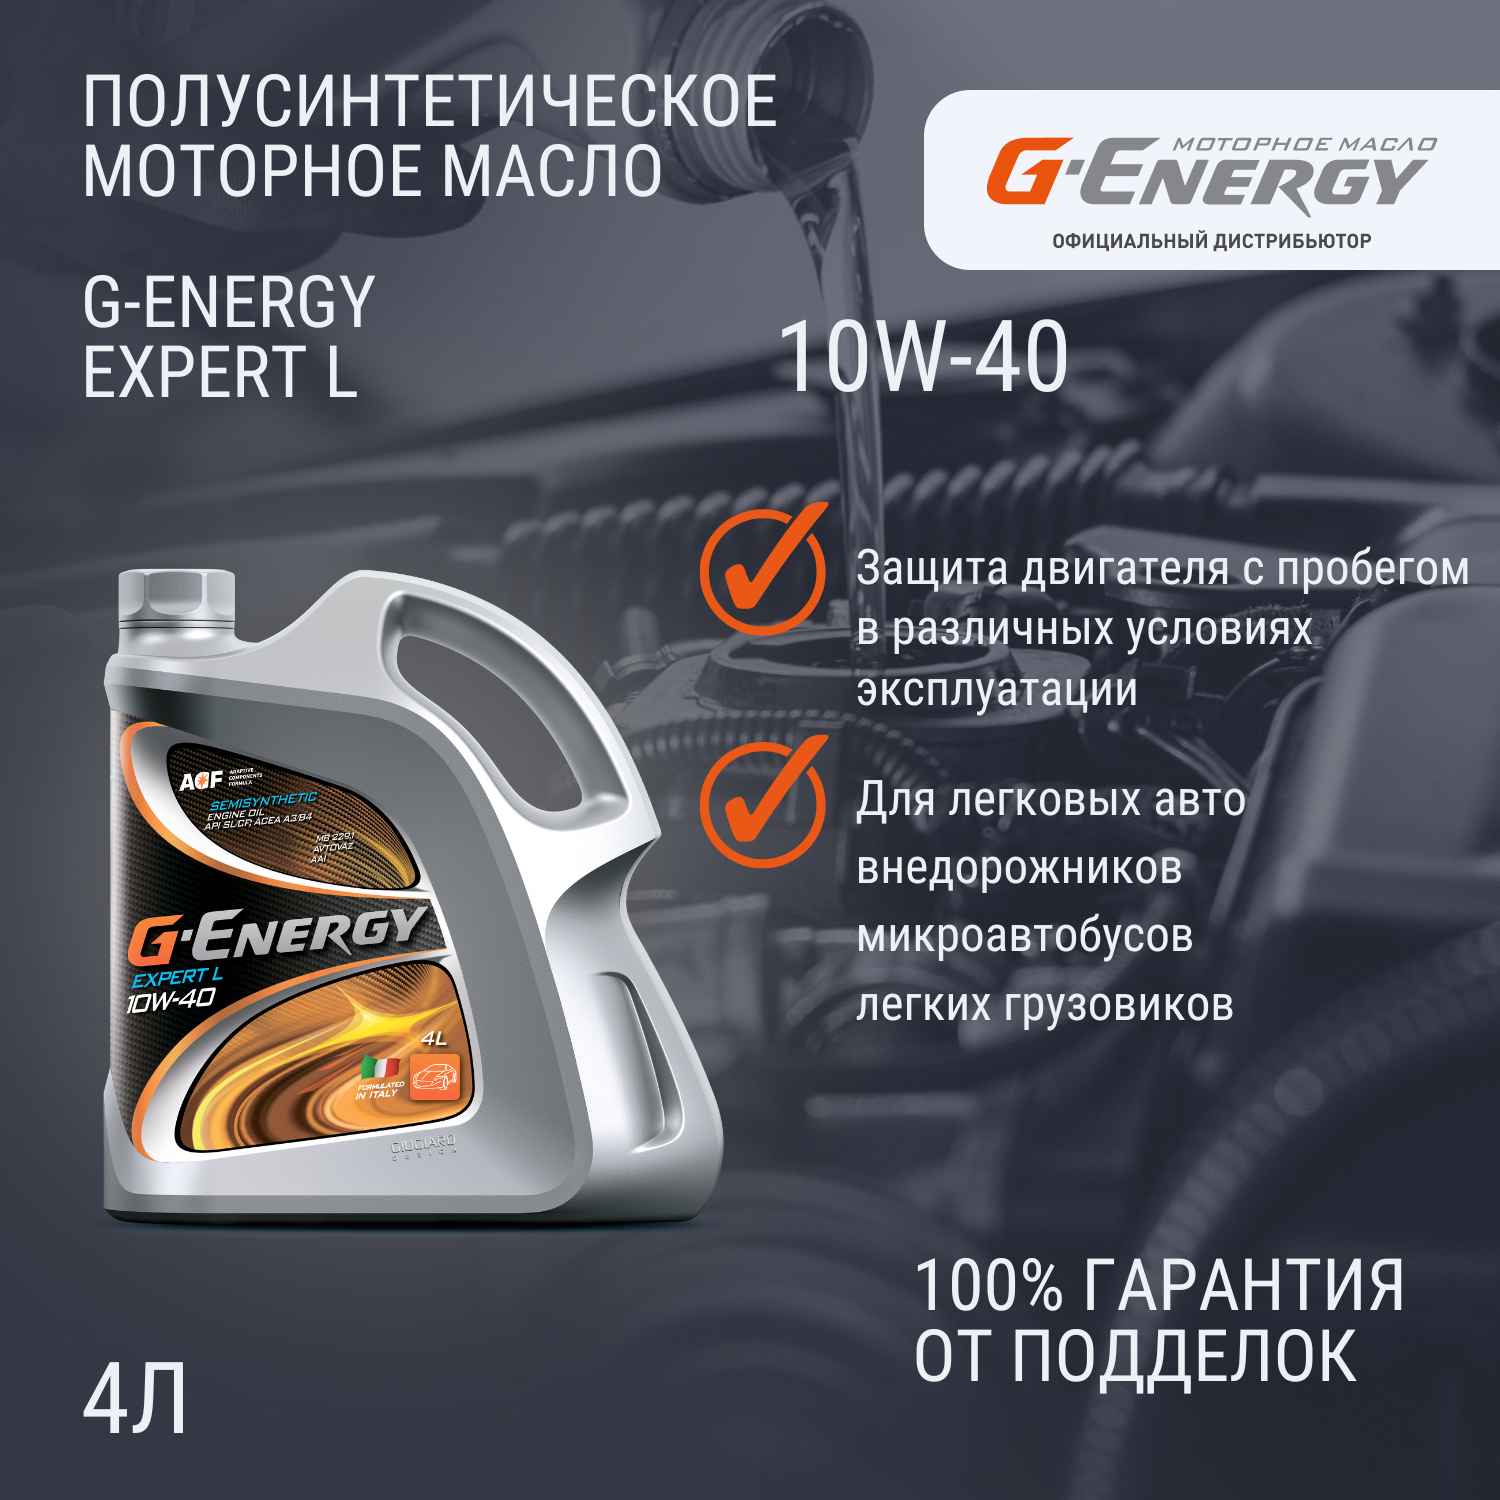 Моторное масло G-Energy S Synth 10W-40, 4л - фото №11